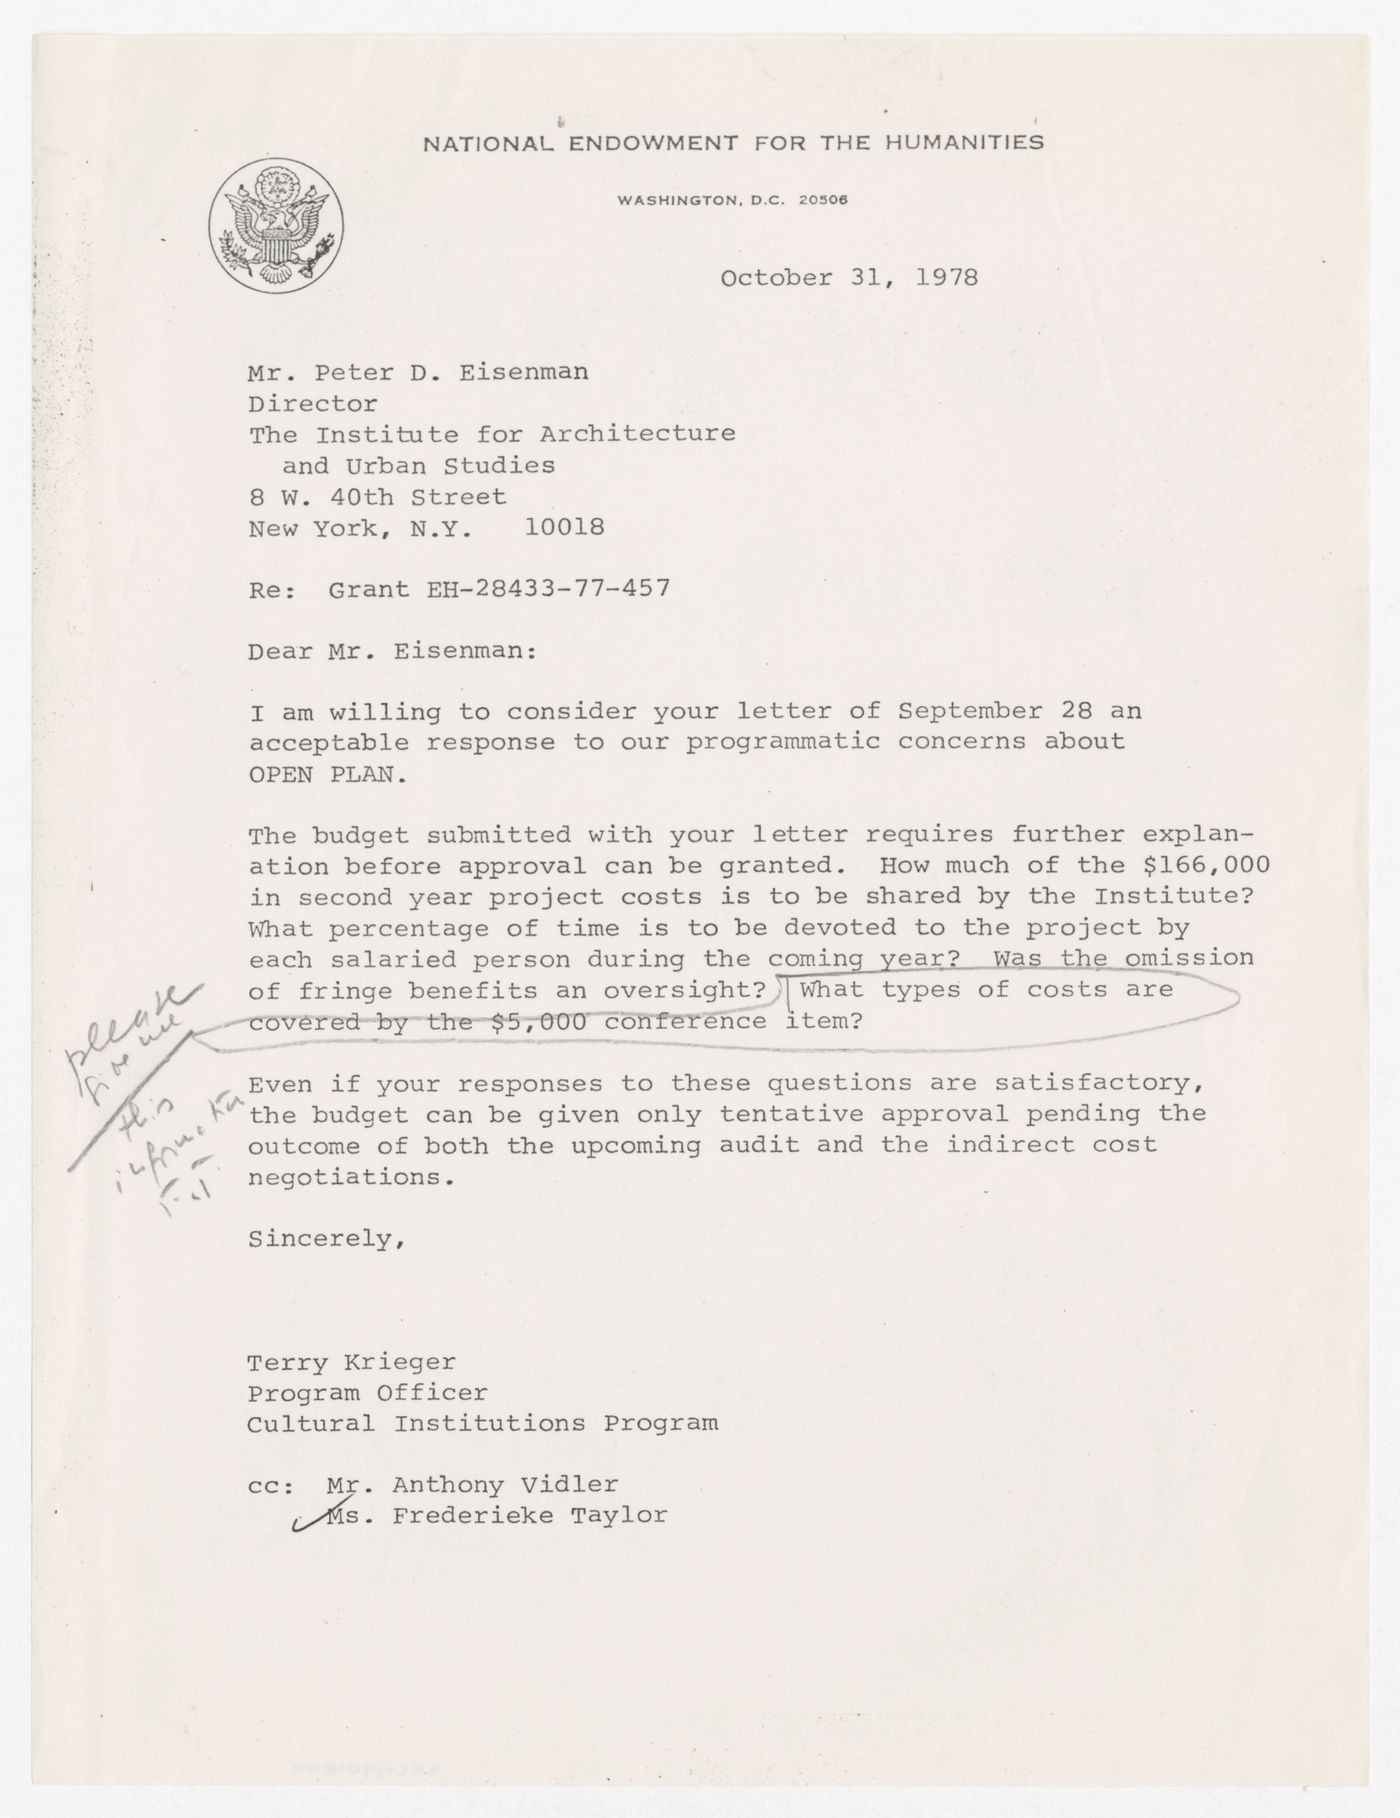 Letter from Terry Krieger to Peter D. Eisenman about approval of the budget for a National Endowment for the Humanities (NEH) grant for Open Plan